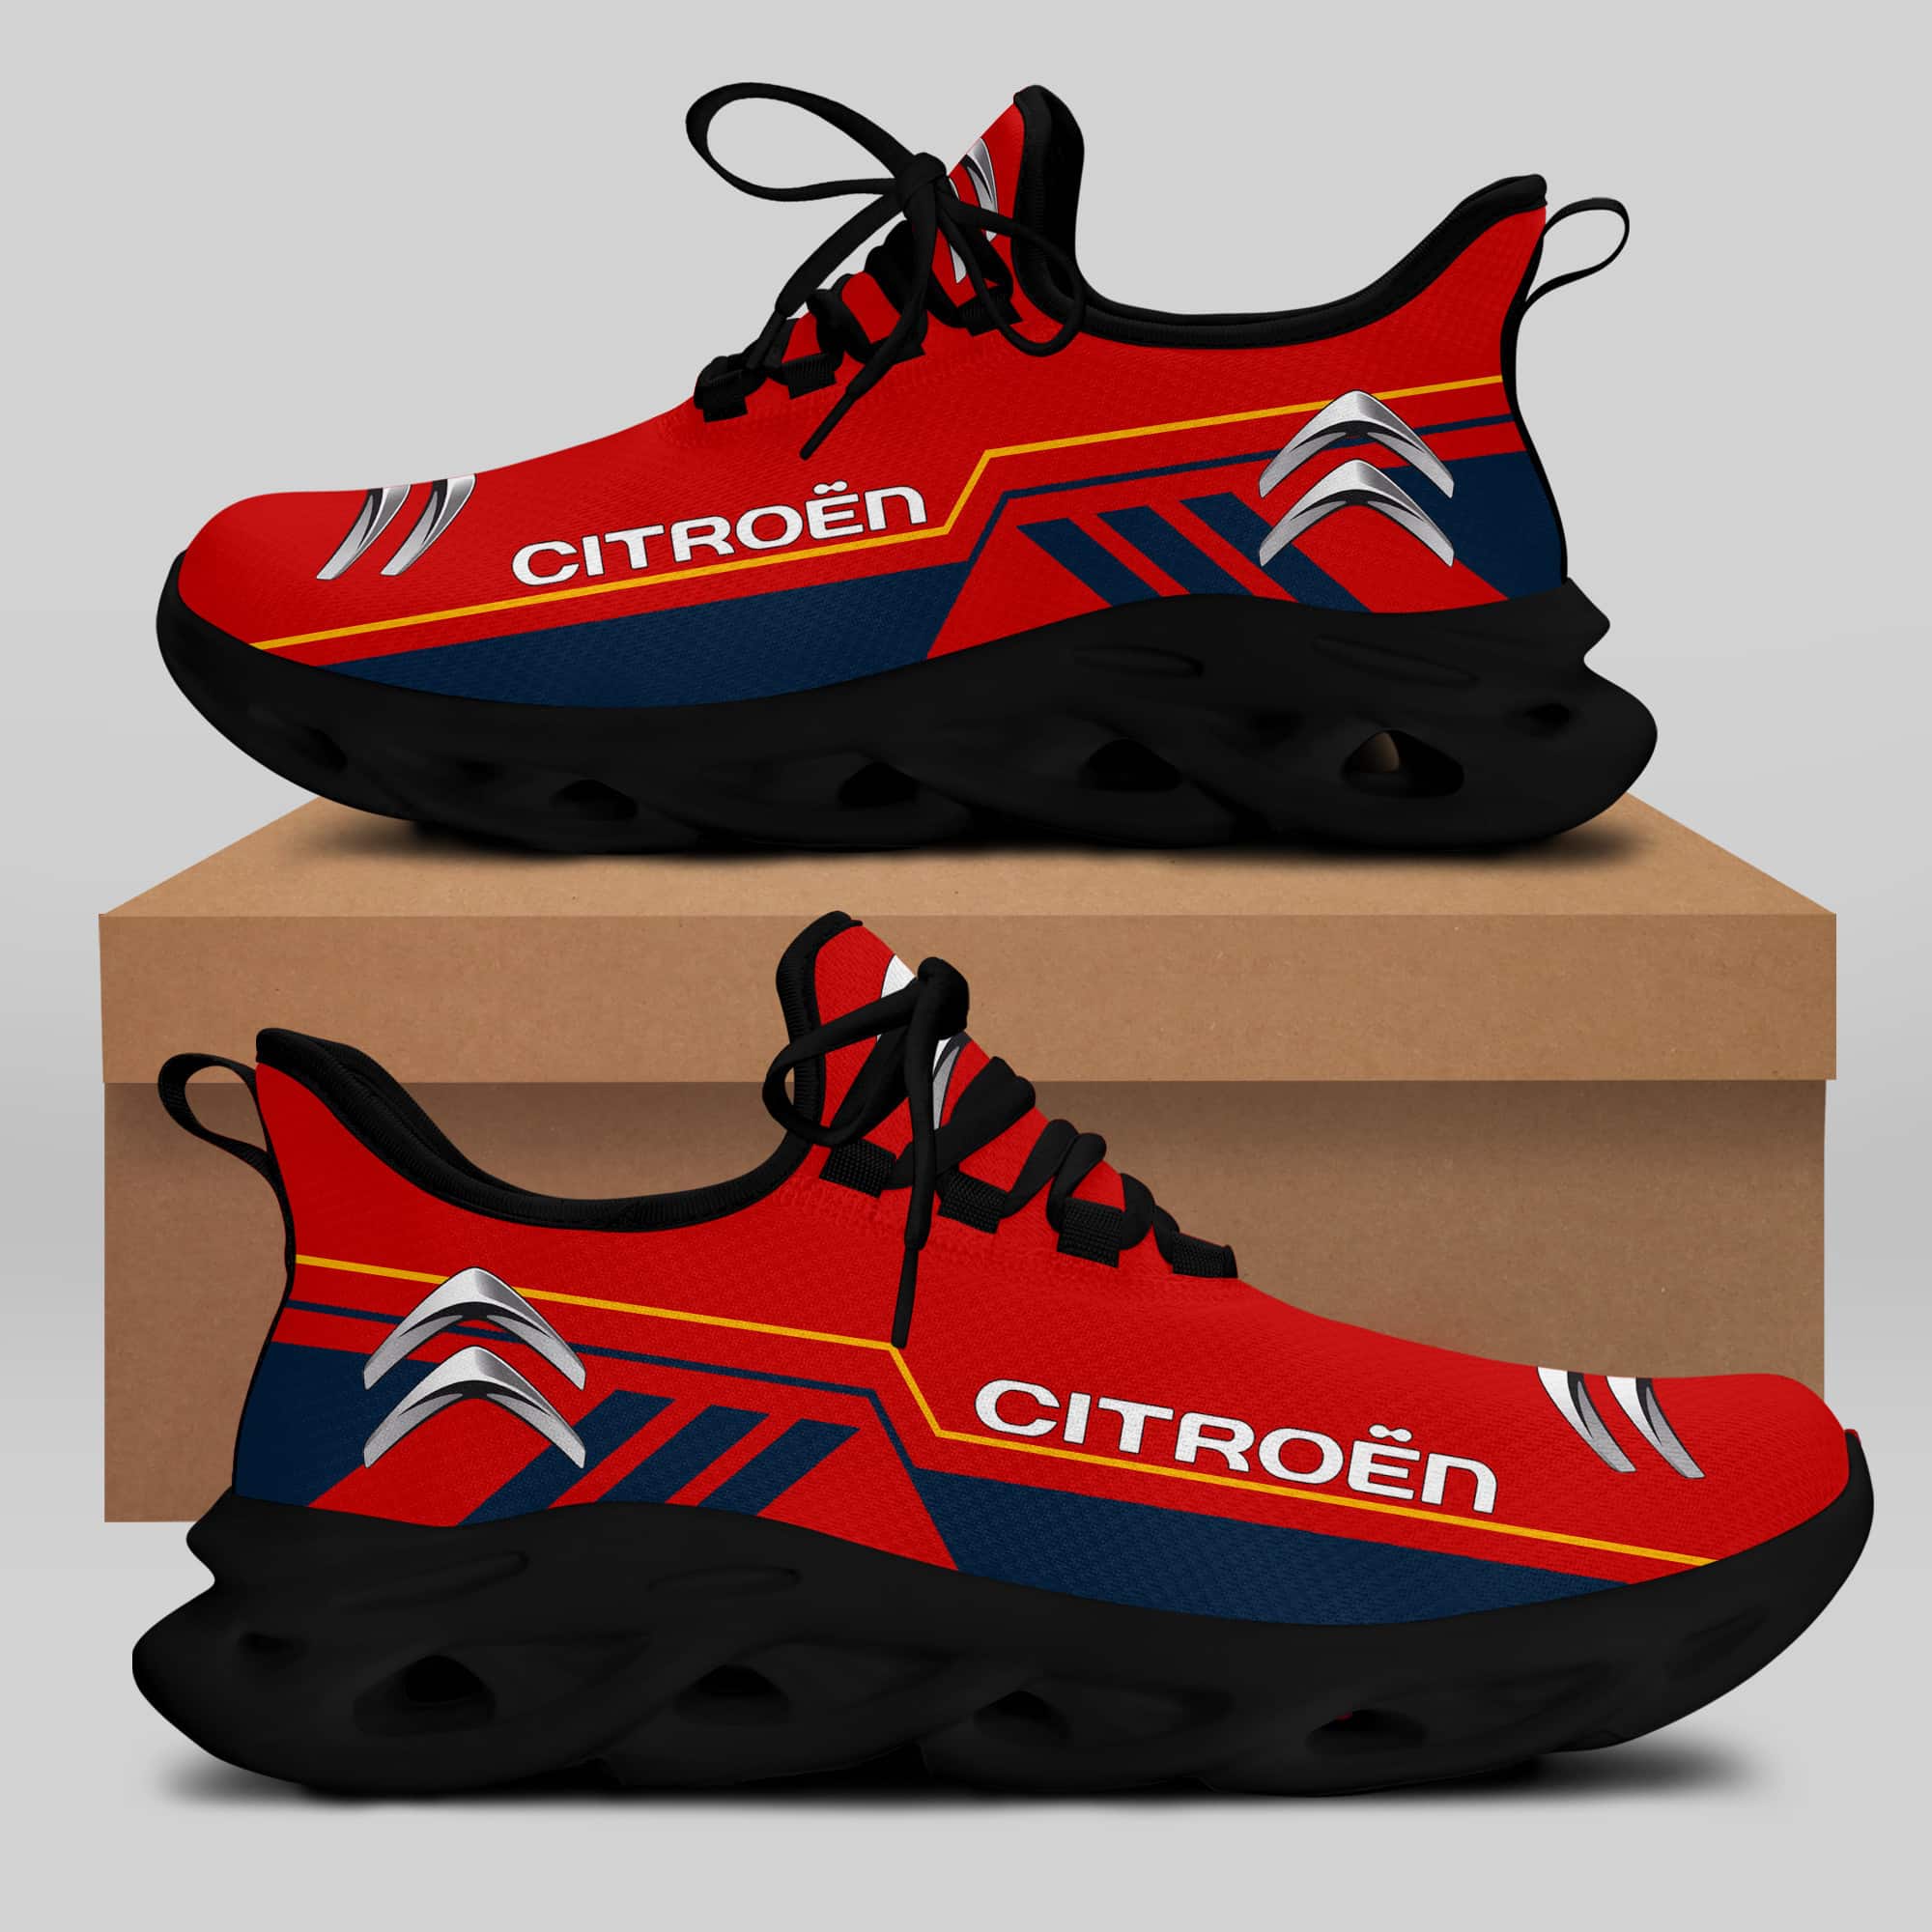 Citroën Running Shoes Max Soul Shoes Sneakers Ver 10 1